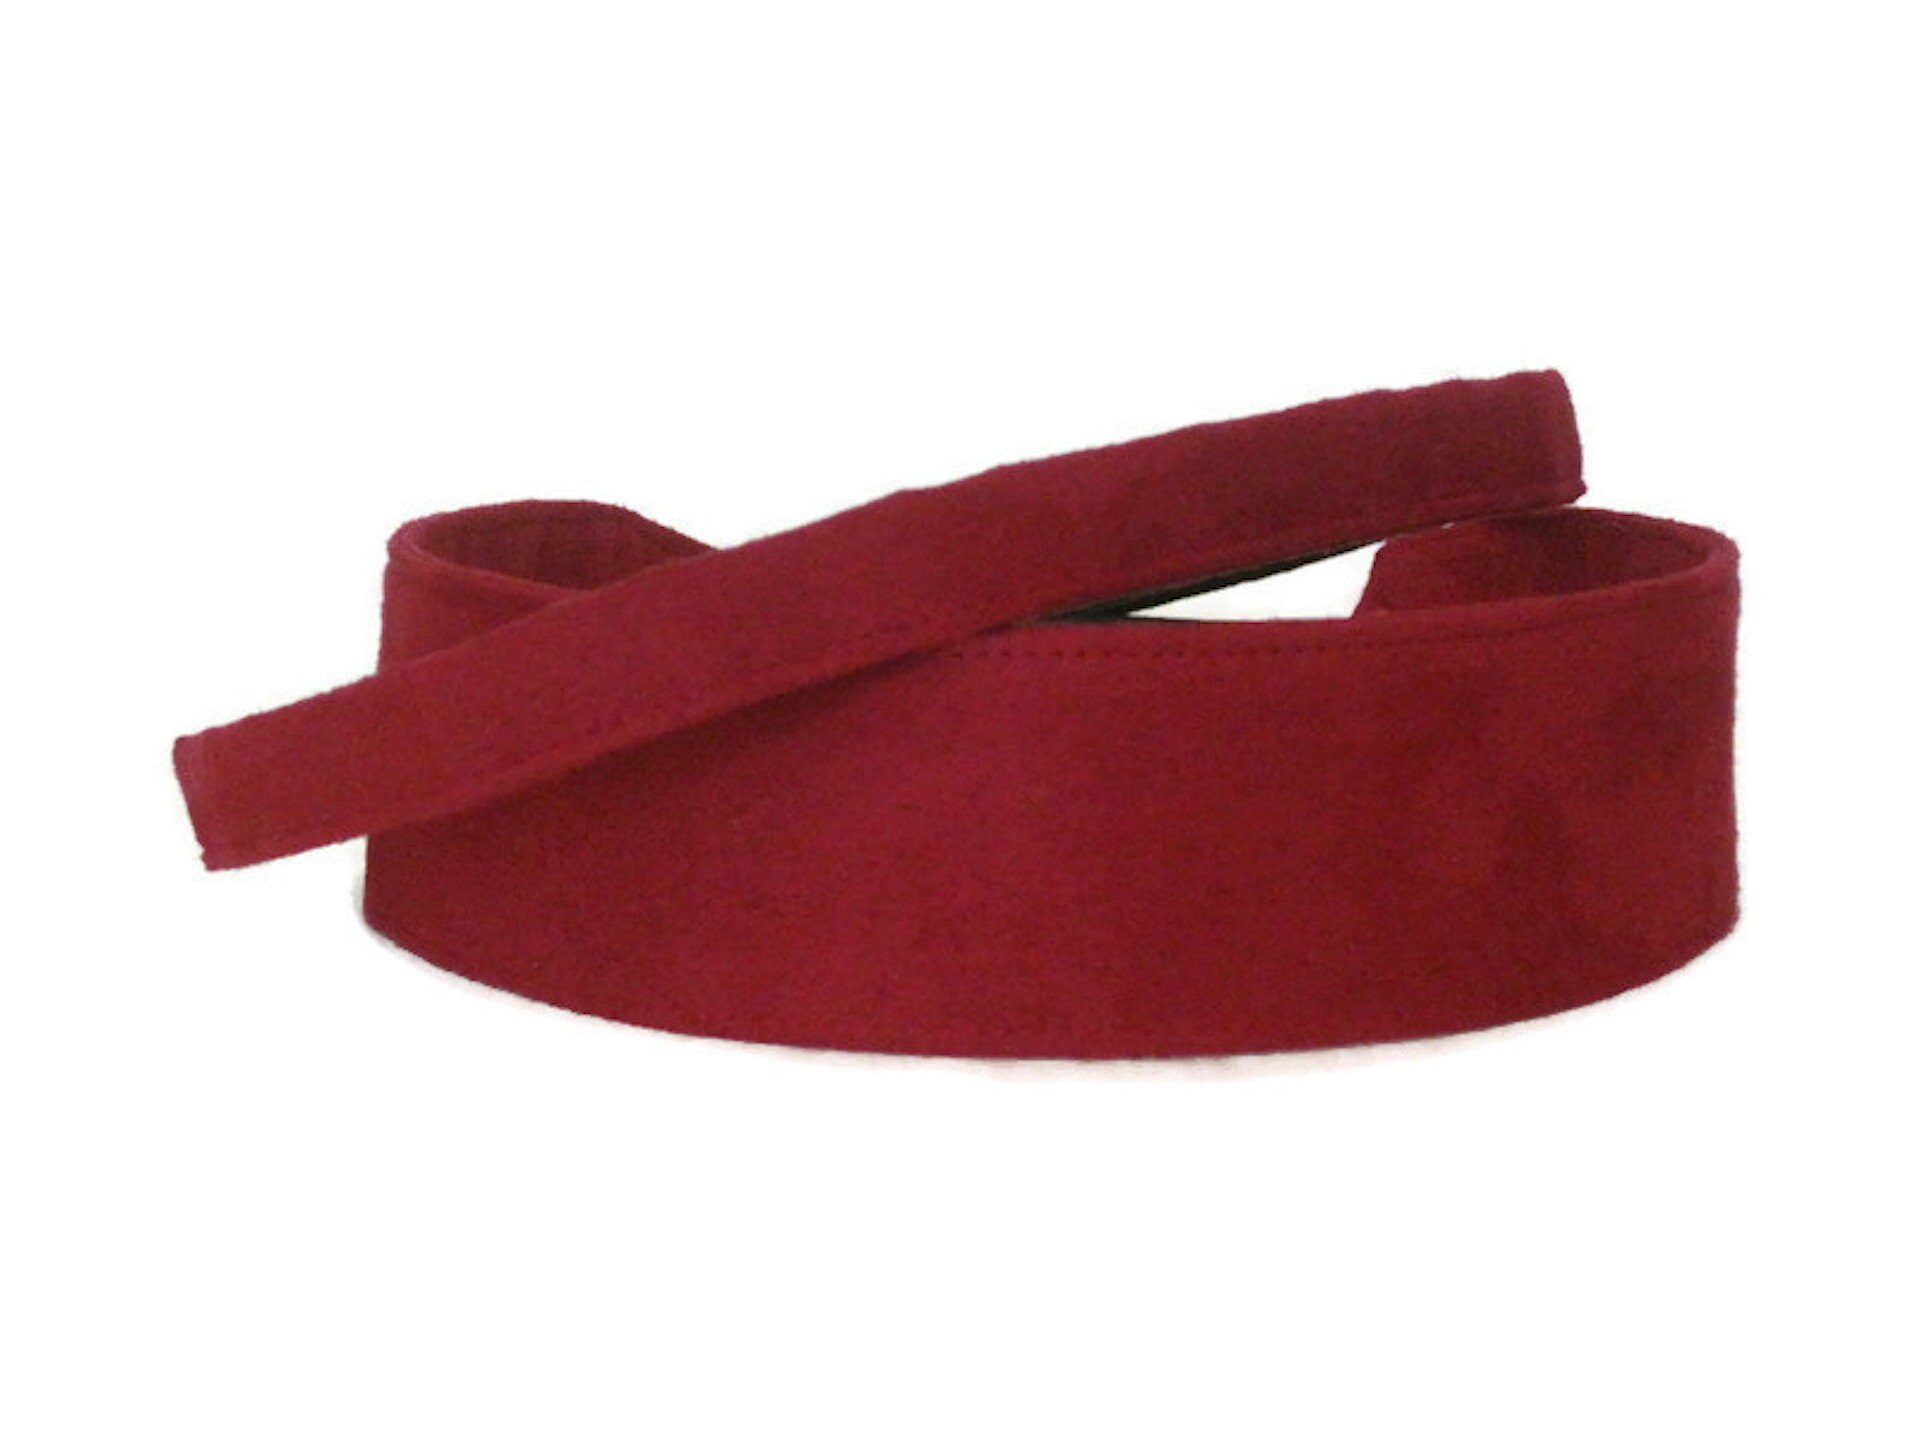 Red Suede Cloth Headbands for Women Men Girls With Adjustable - Etsy